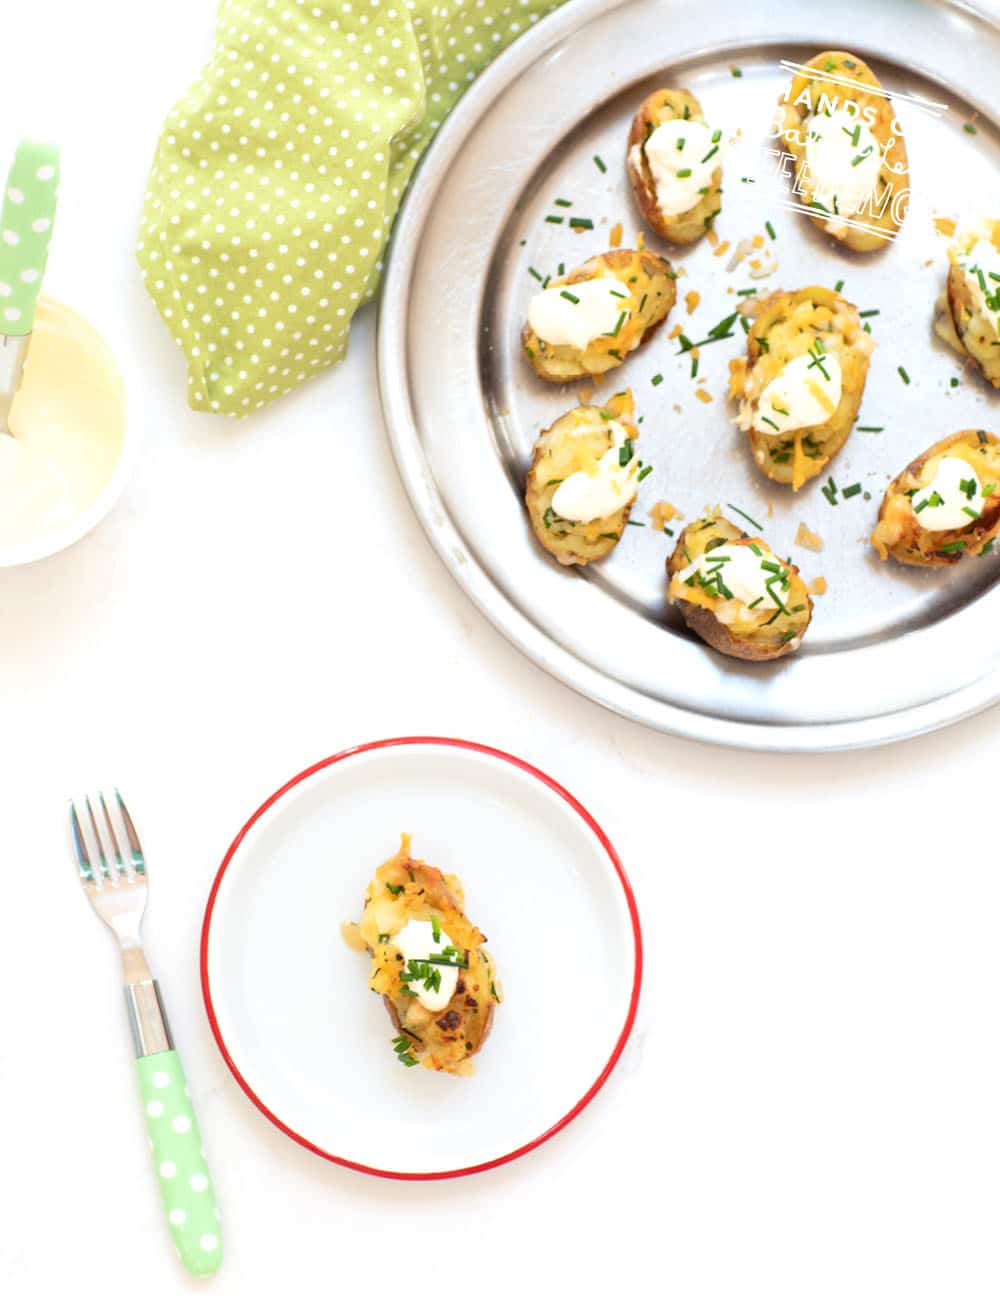 Baby Irish potato bites are an easy appetizer recipe for St. Patrick's Day! Bite sized baby potatoes loaded with a yummy filling topped with a dollop of sour cream or Greek yogurt. #babyledweaning #fingerfood #saintpatricksday #potatoes